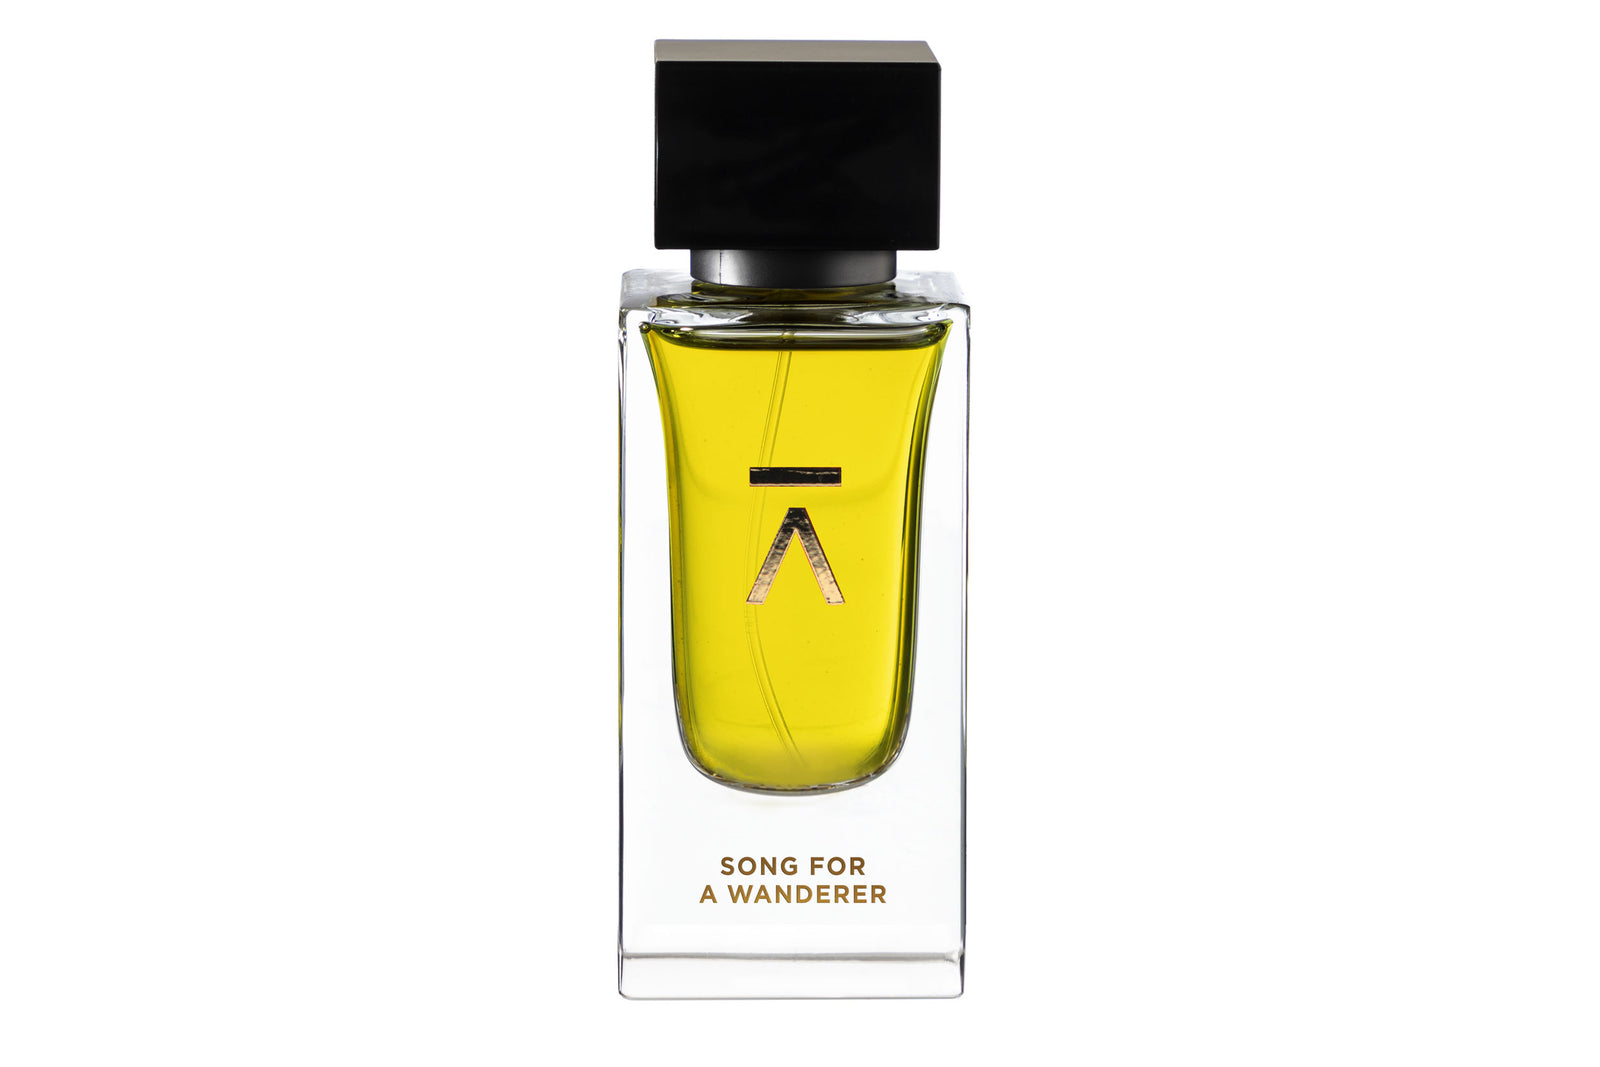 Azman Two Minutes After The Kiss Deluxe Bottle - Azman Perfumes